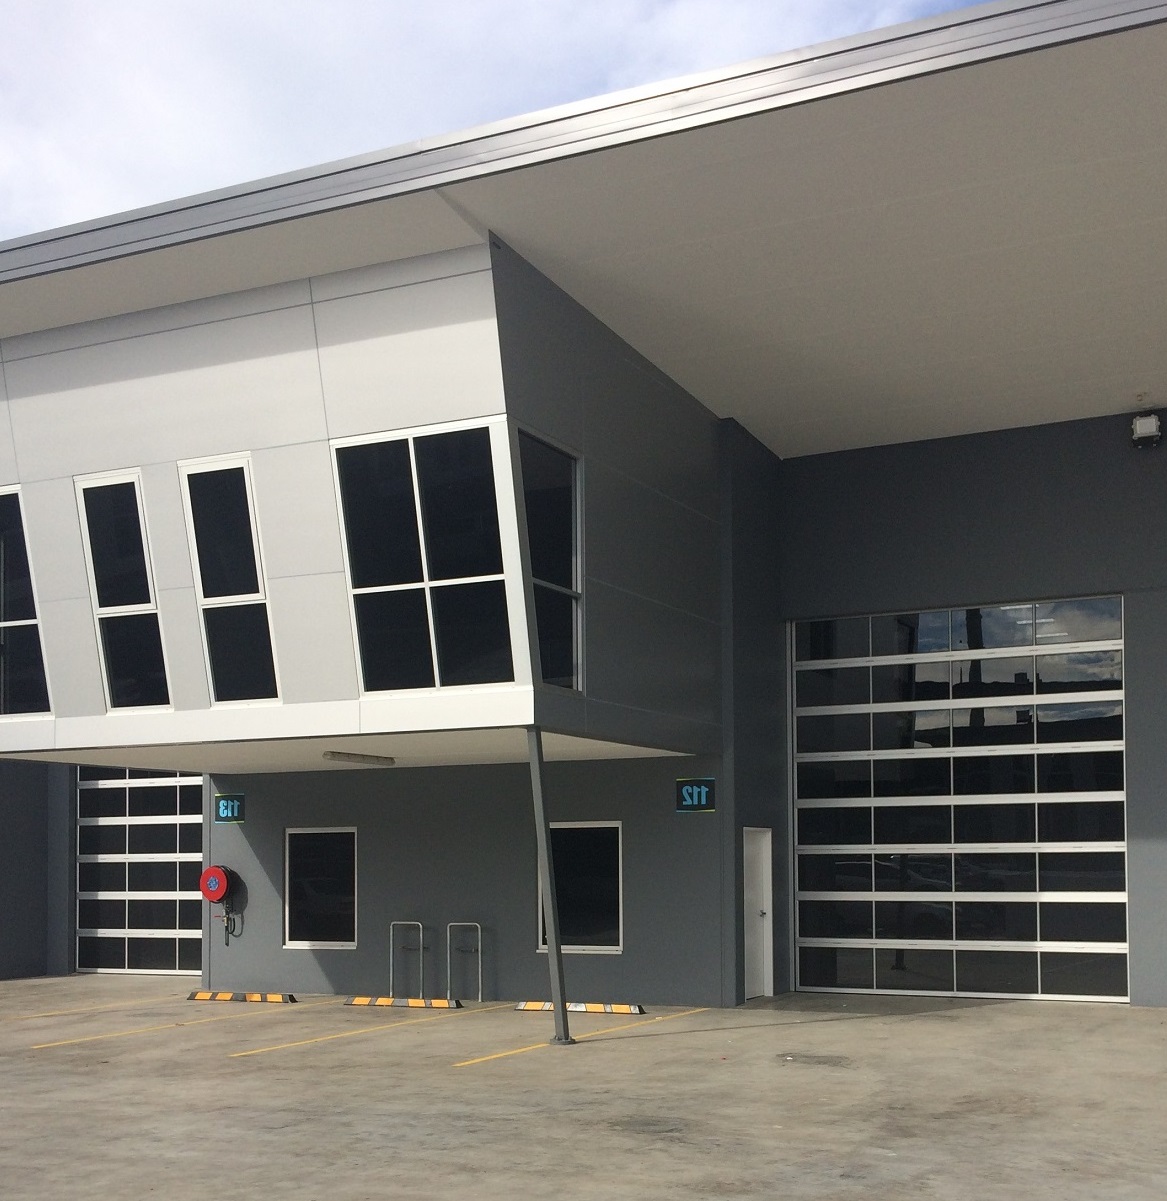 Industrial property for lease in north rocks 2